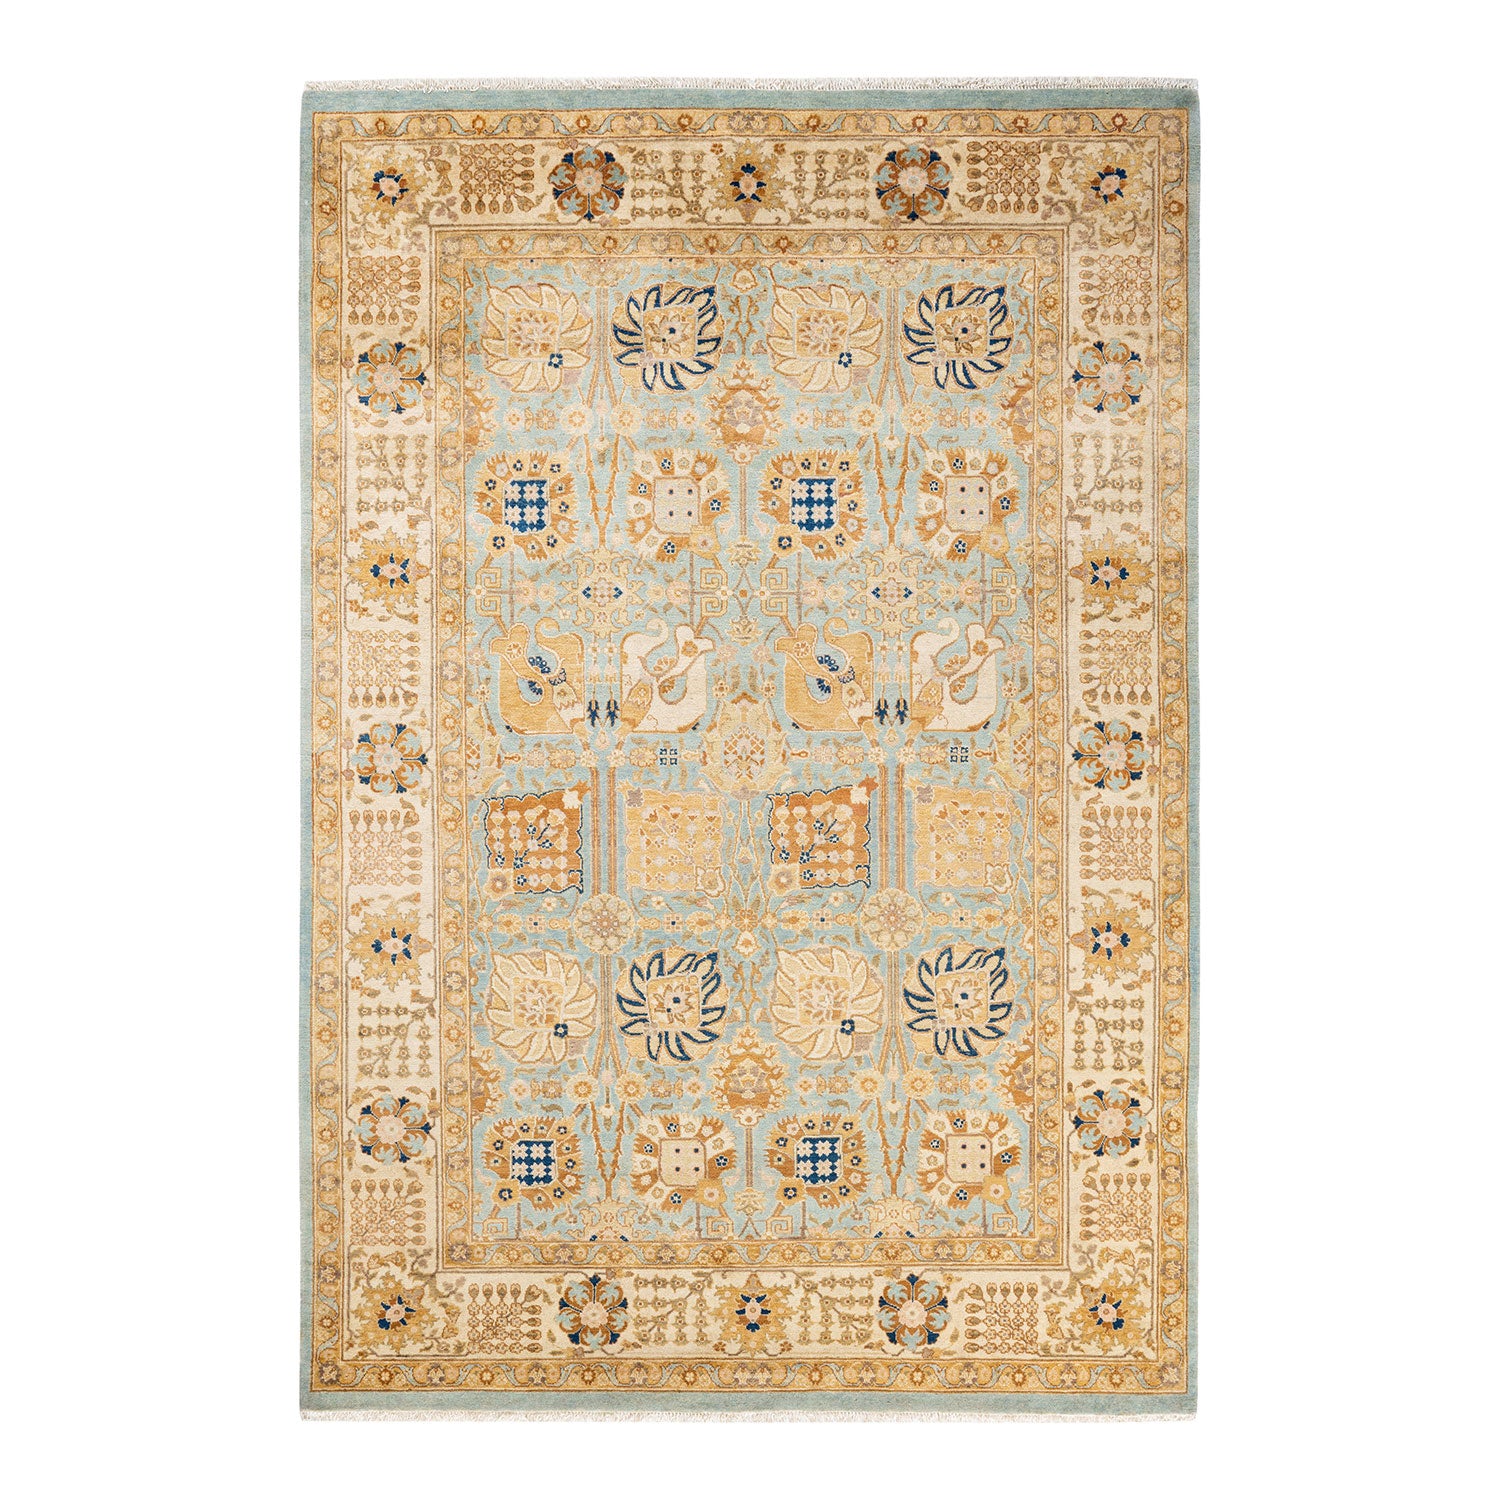 Exquisite rectangular rug with intricate floral and geometric motifs